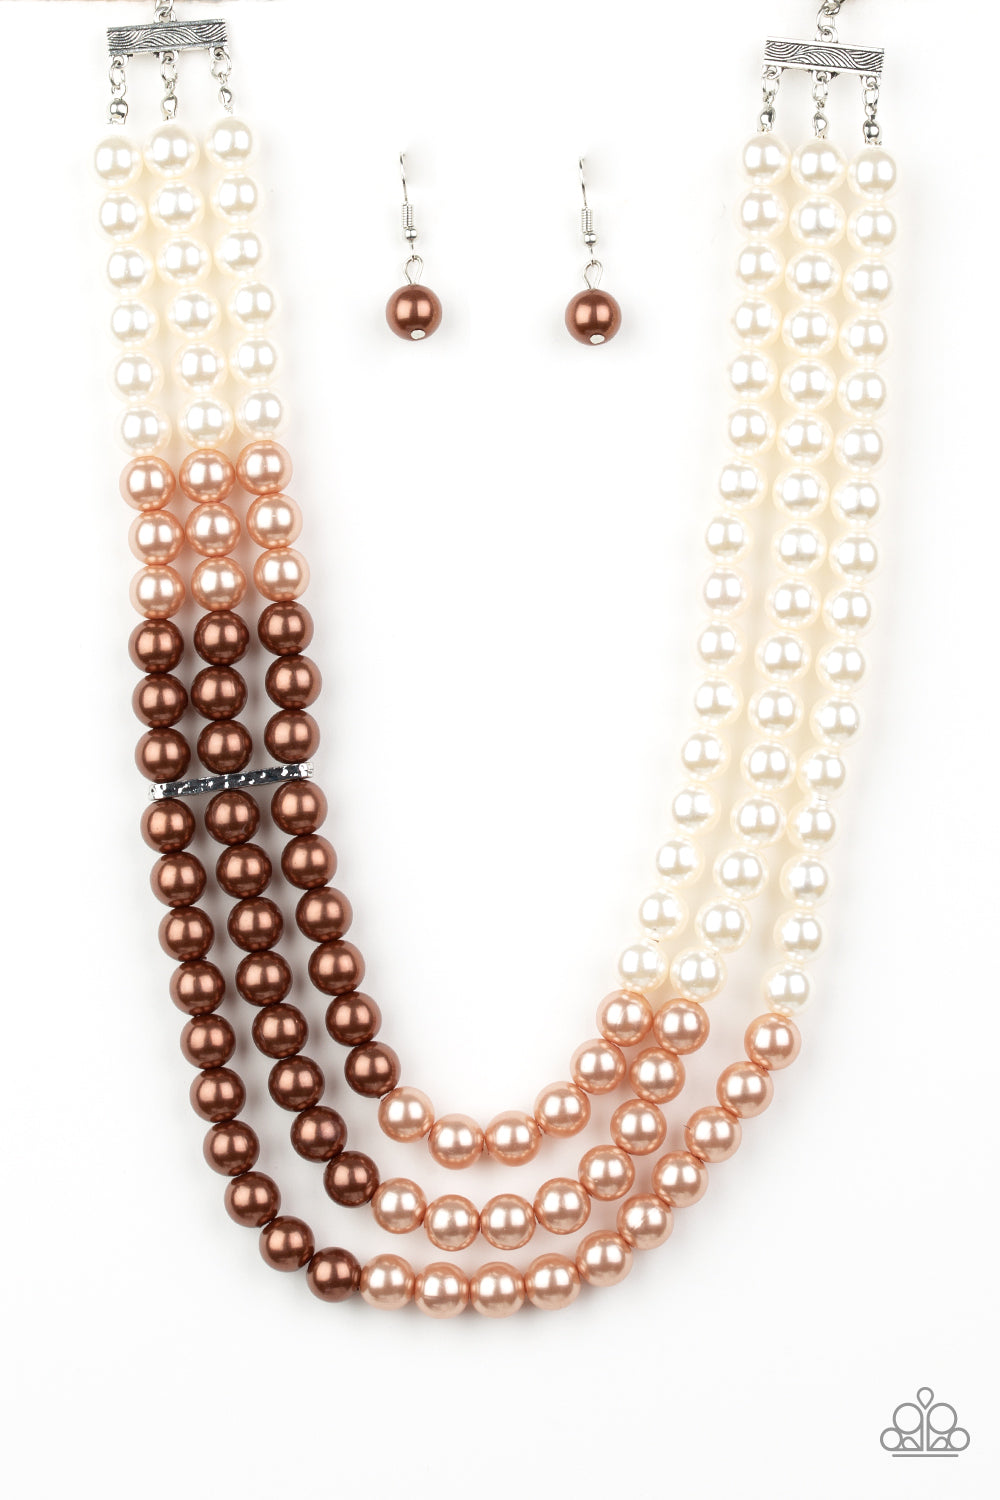 Times Square Starlet Brown Paparazzi Necklaces Cashmere Pink Jewels - Cashmere Pink Jewels & Accessories, Cashmere Pink Jewels & Accessories - Paparazzi